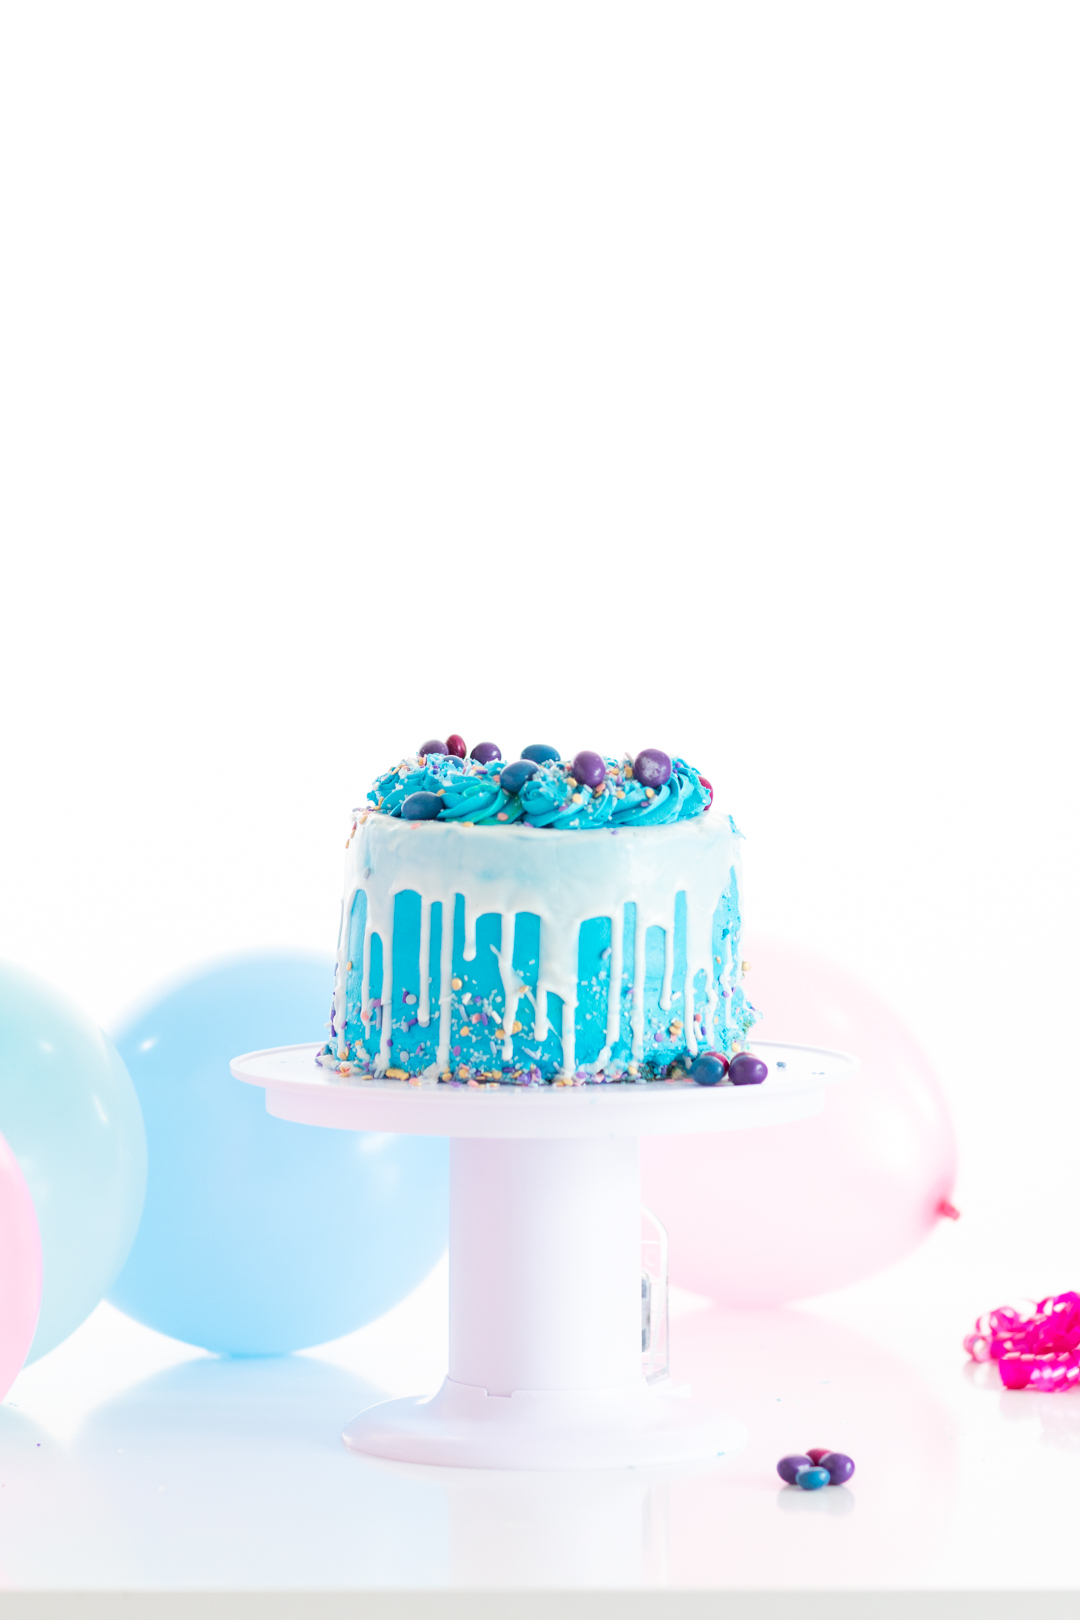 pretty blue cake with white icing set on a surprise cake stand